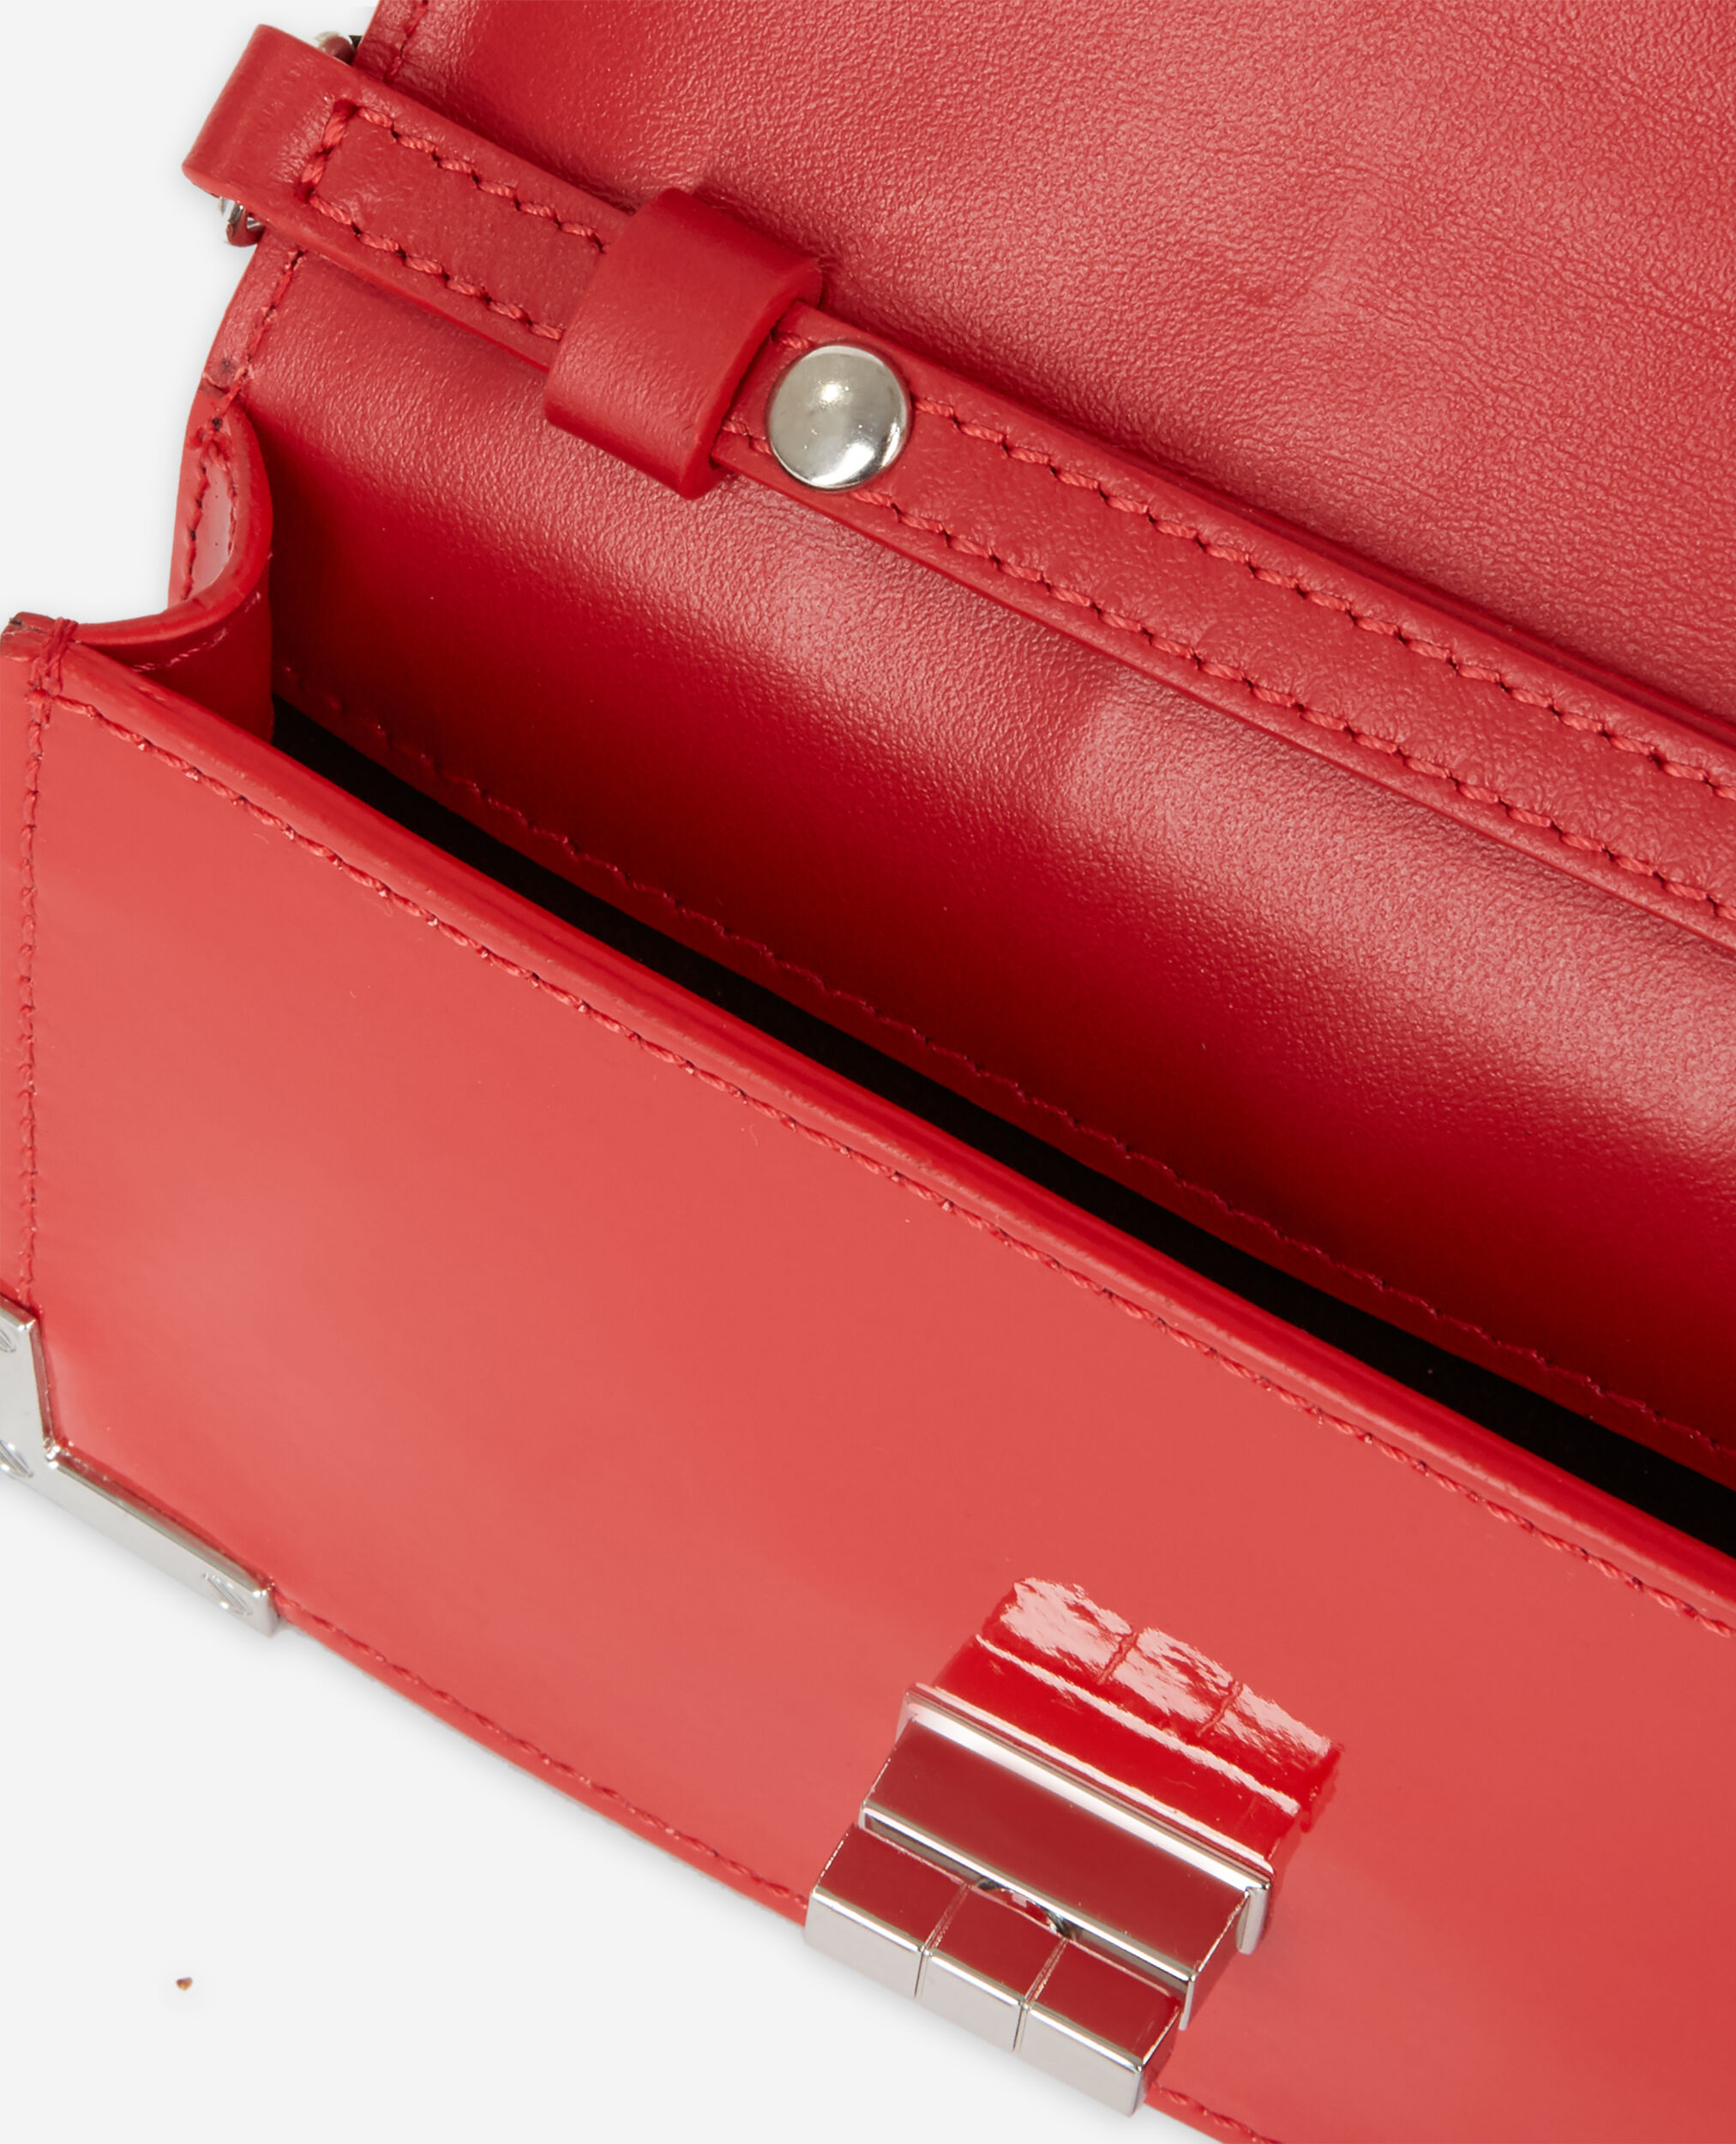 Small Emily clutch bag in red leather, RED, hi-res image number null